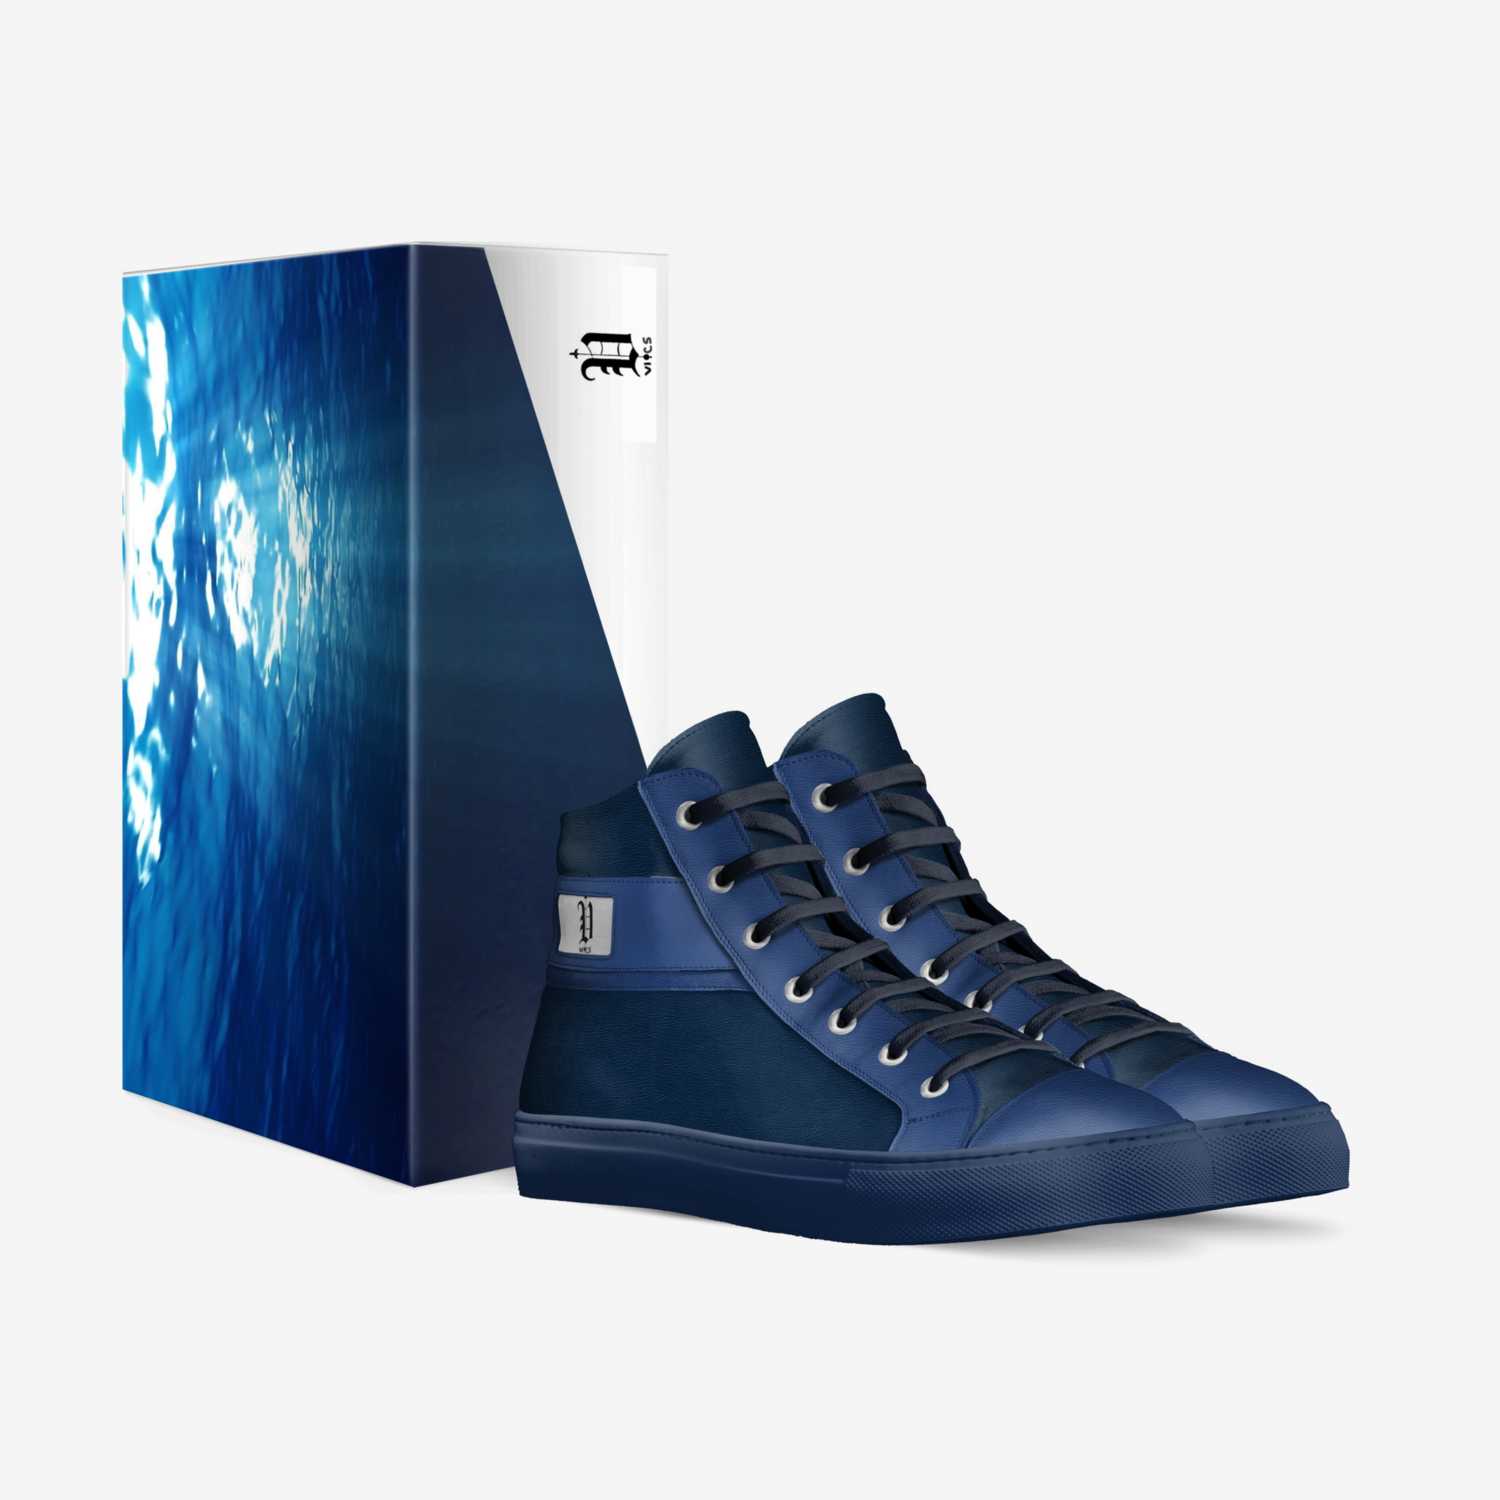 vics ocean custom made in Italy shoes by Brayden Murphy | Box view